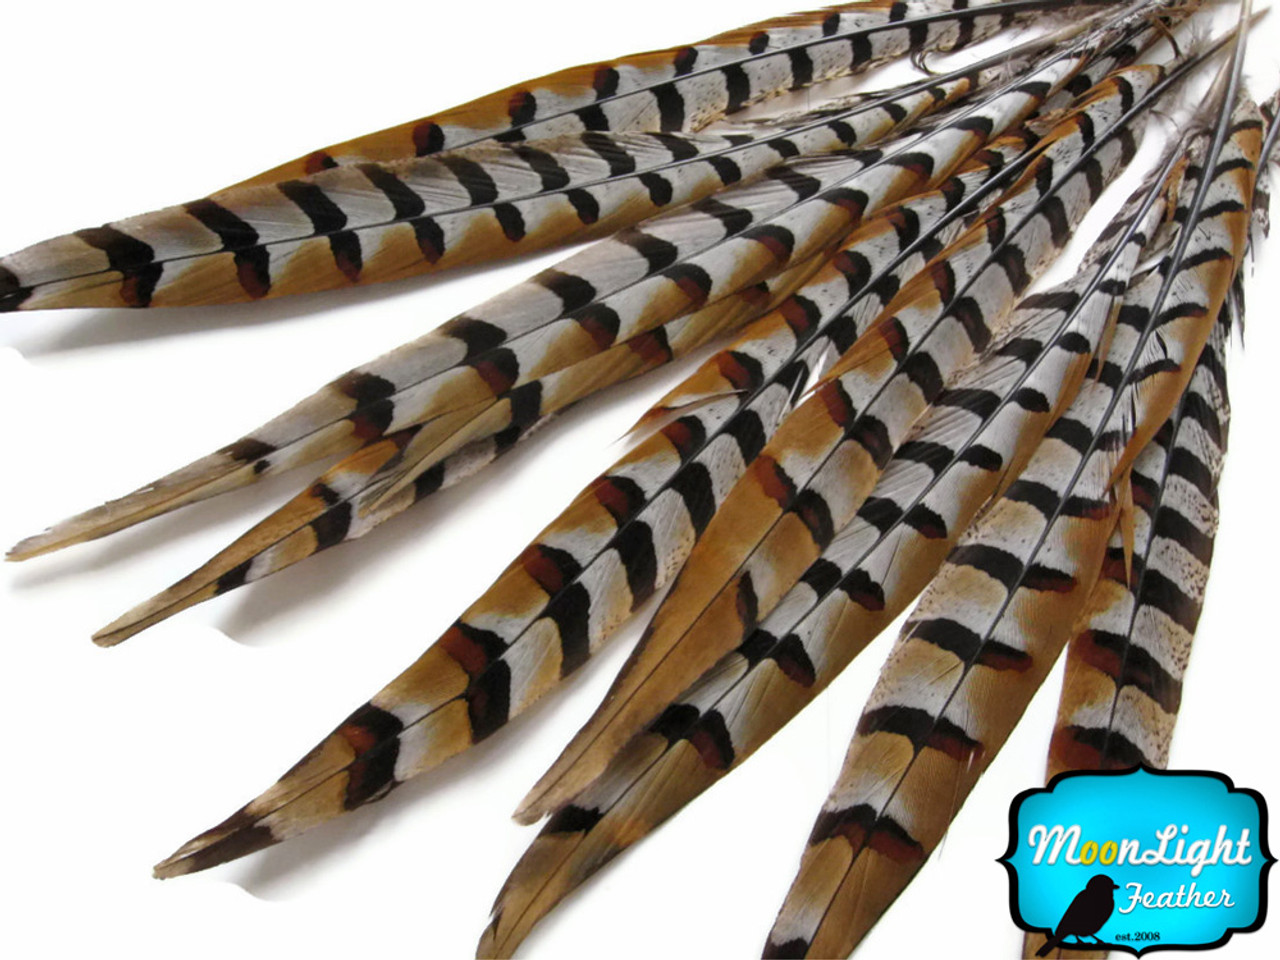 Natural Pheasant Feathers (16-18 inches) - Feathers - Basic Craft